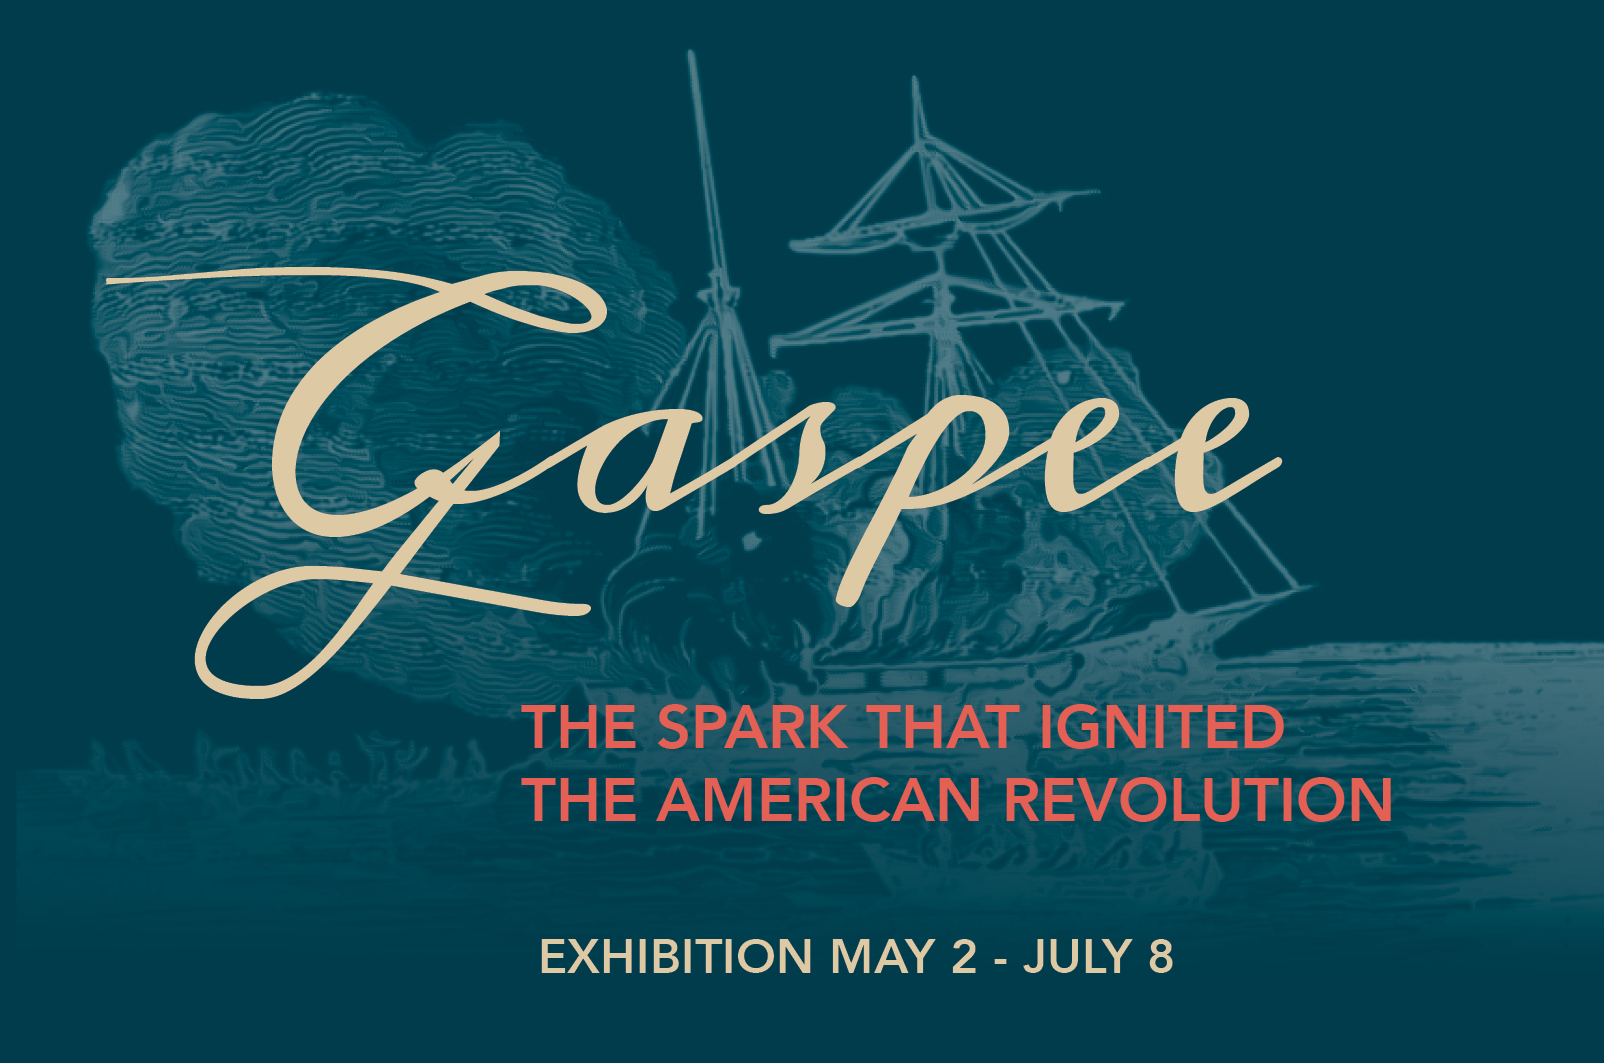 Gaspee: The Spark that Ignited the American Revolution